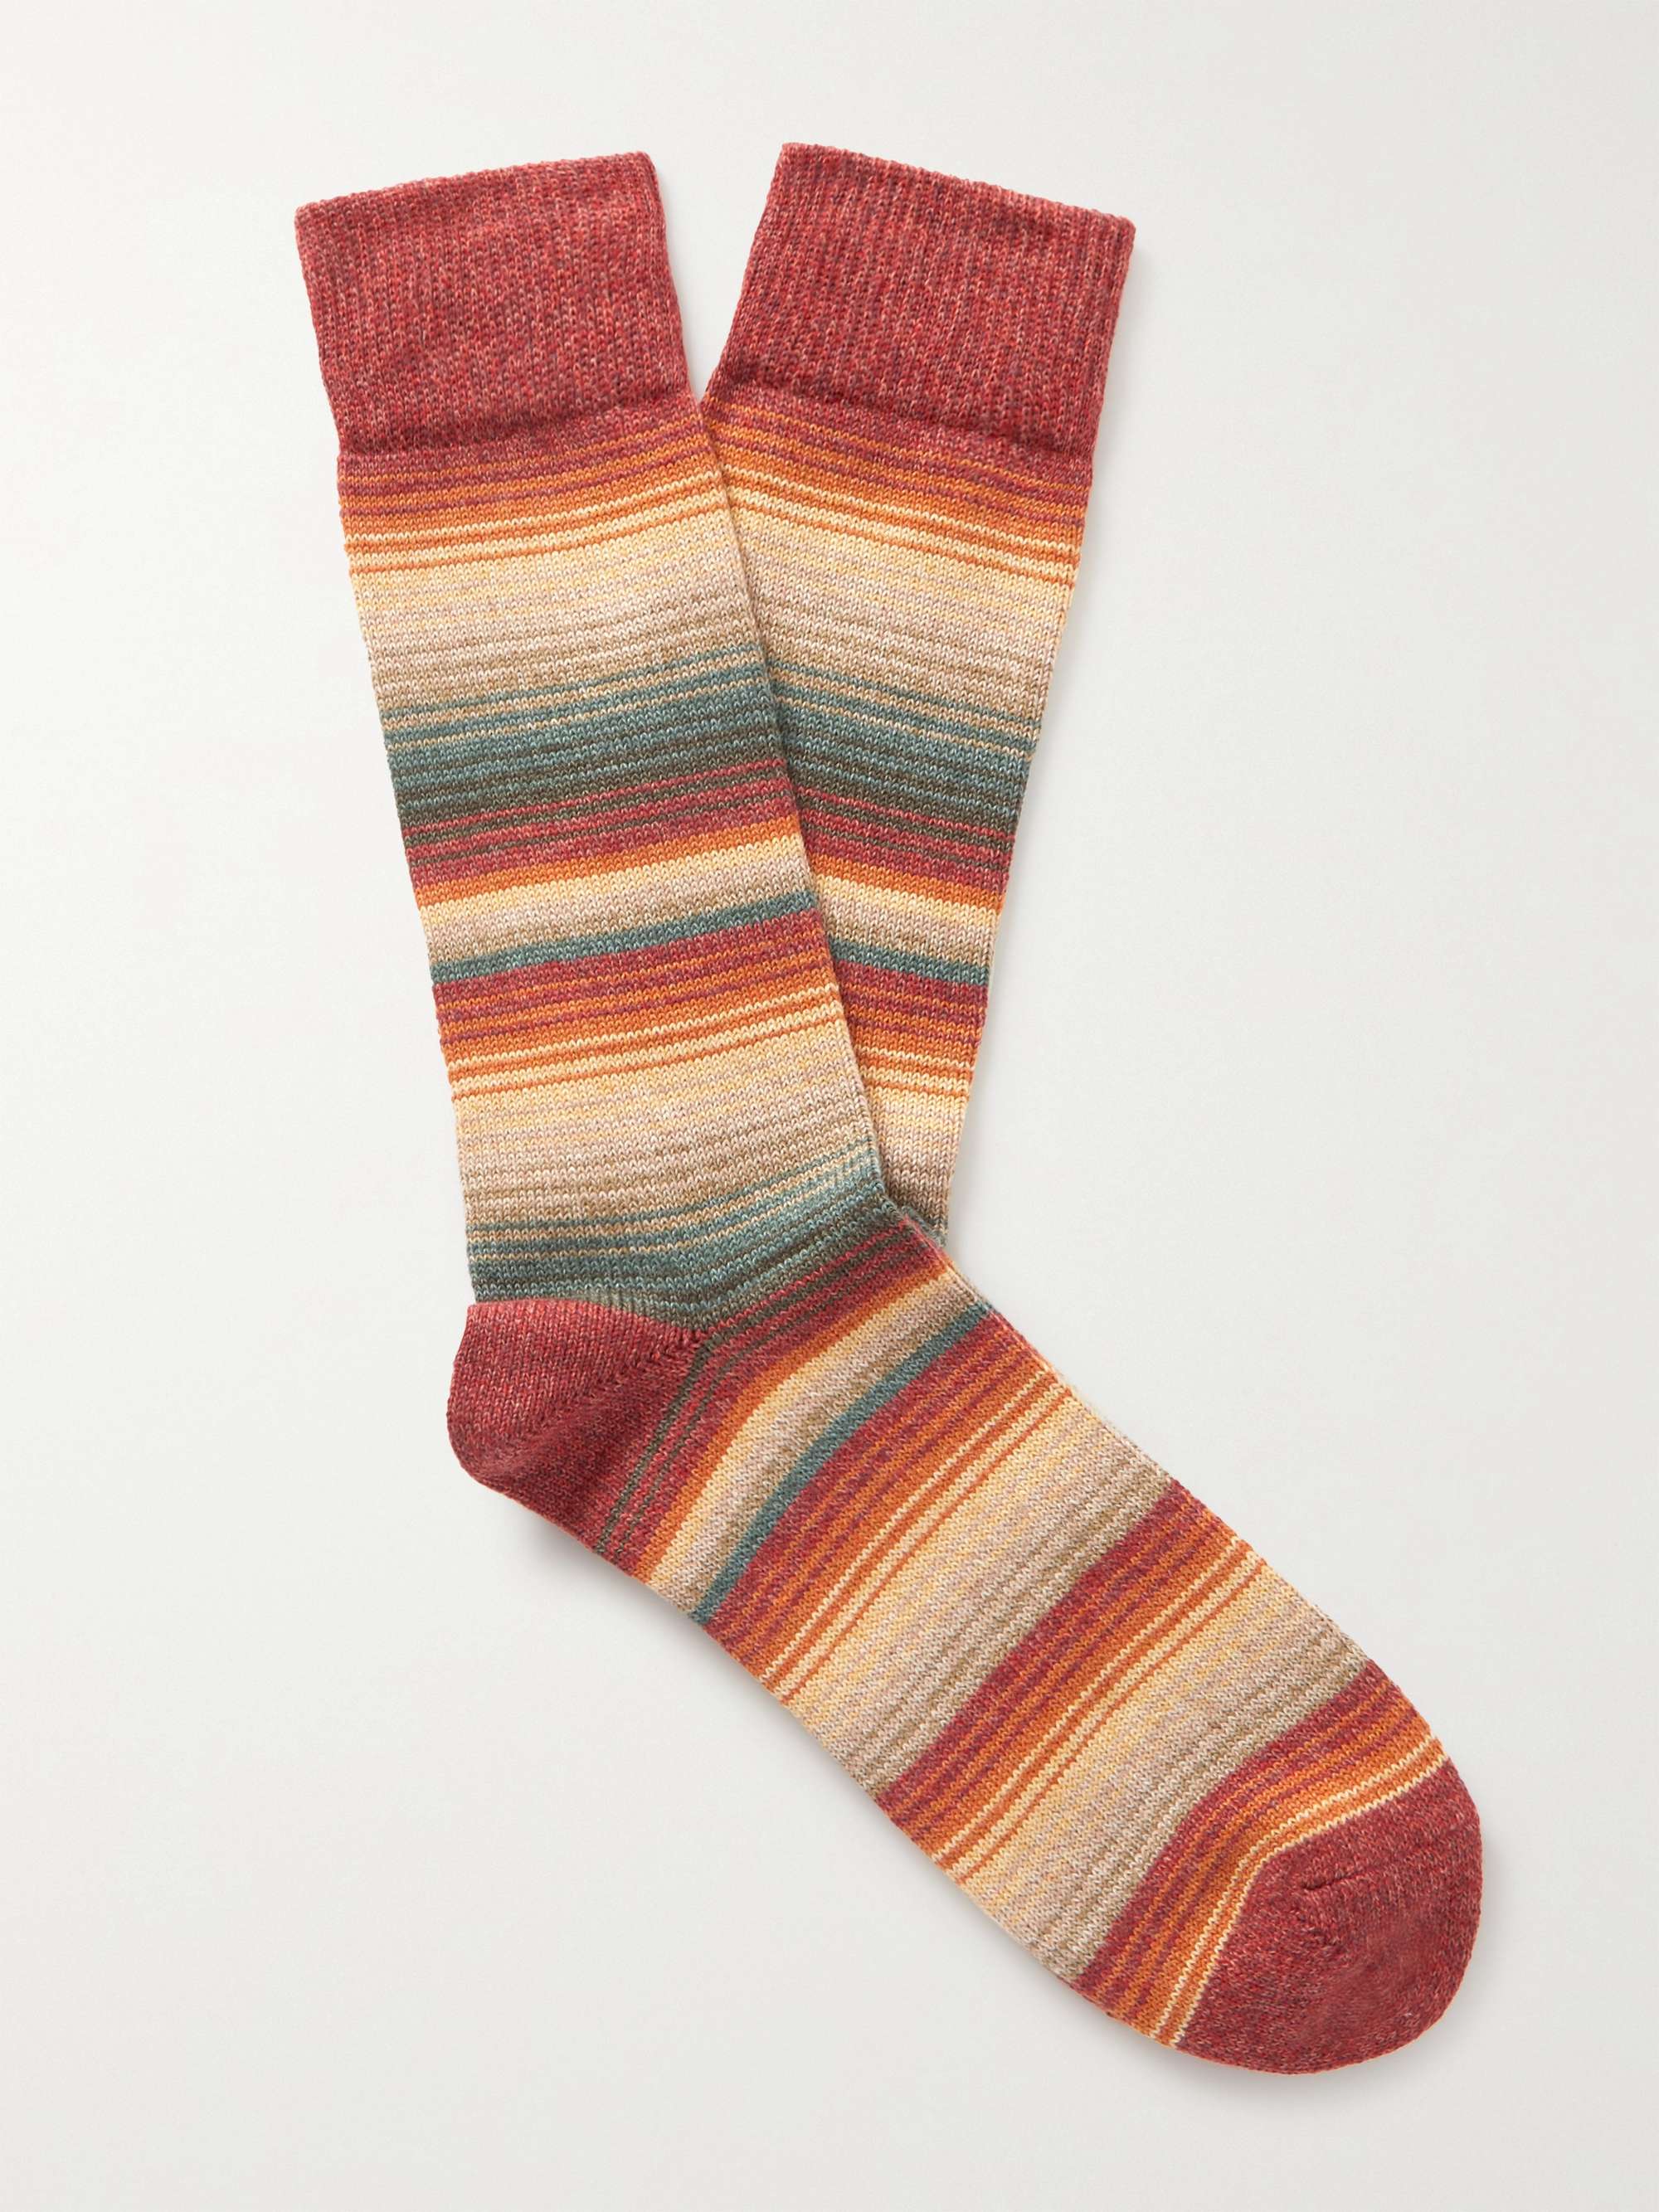 ANONYMOUS ISM Sarape Striped Knitted Socks